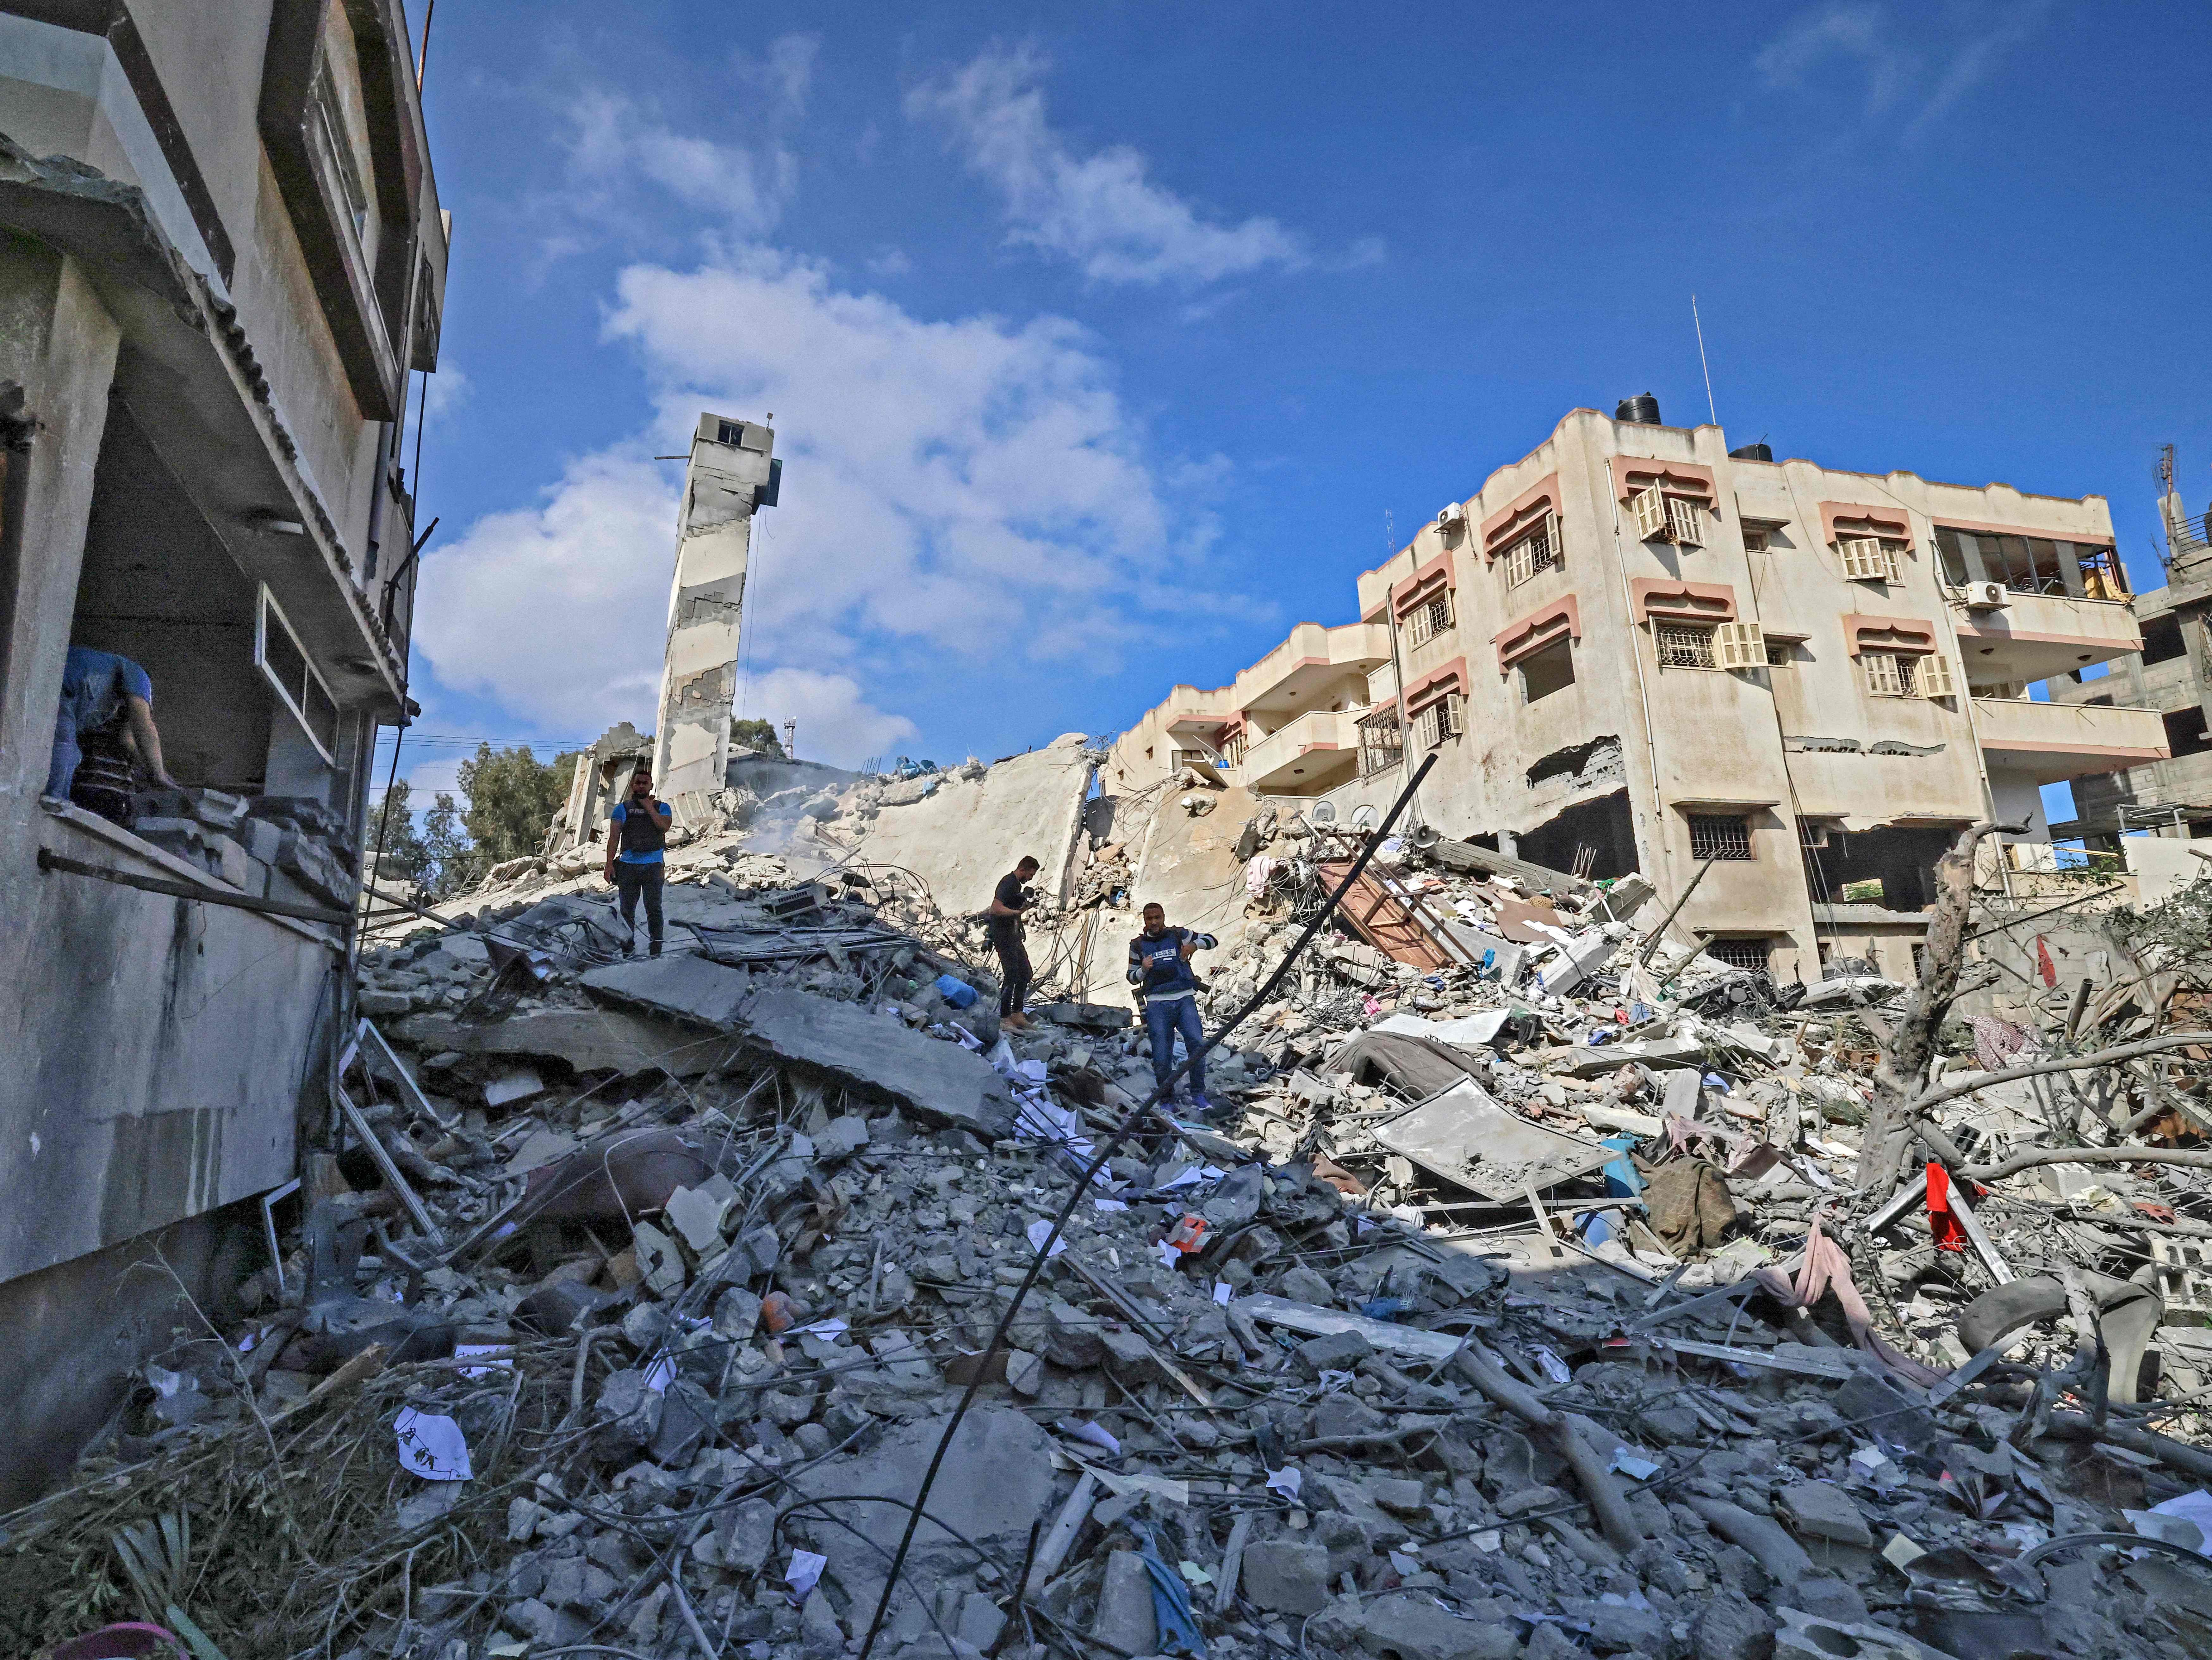 A six-storey building in Gaza City after it was destroyed in an Israeli airstrike